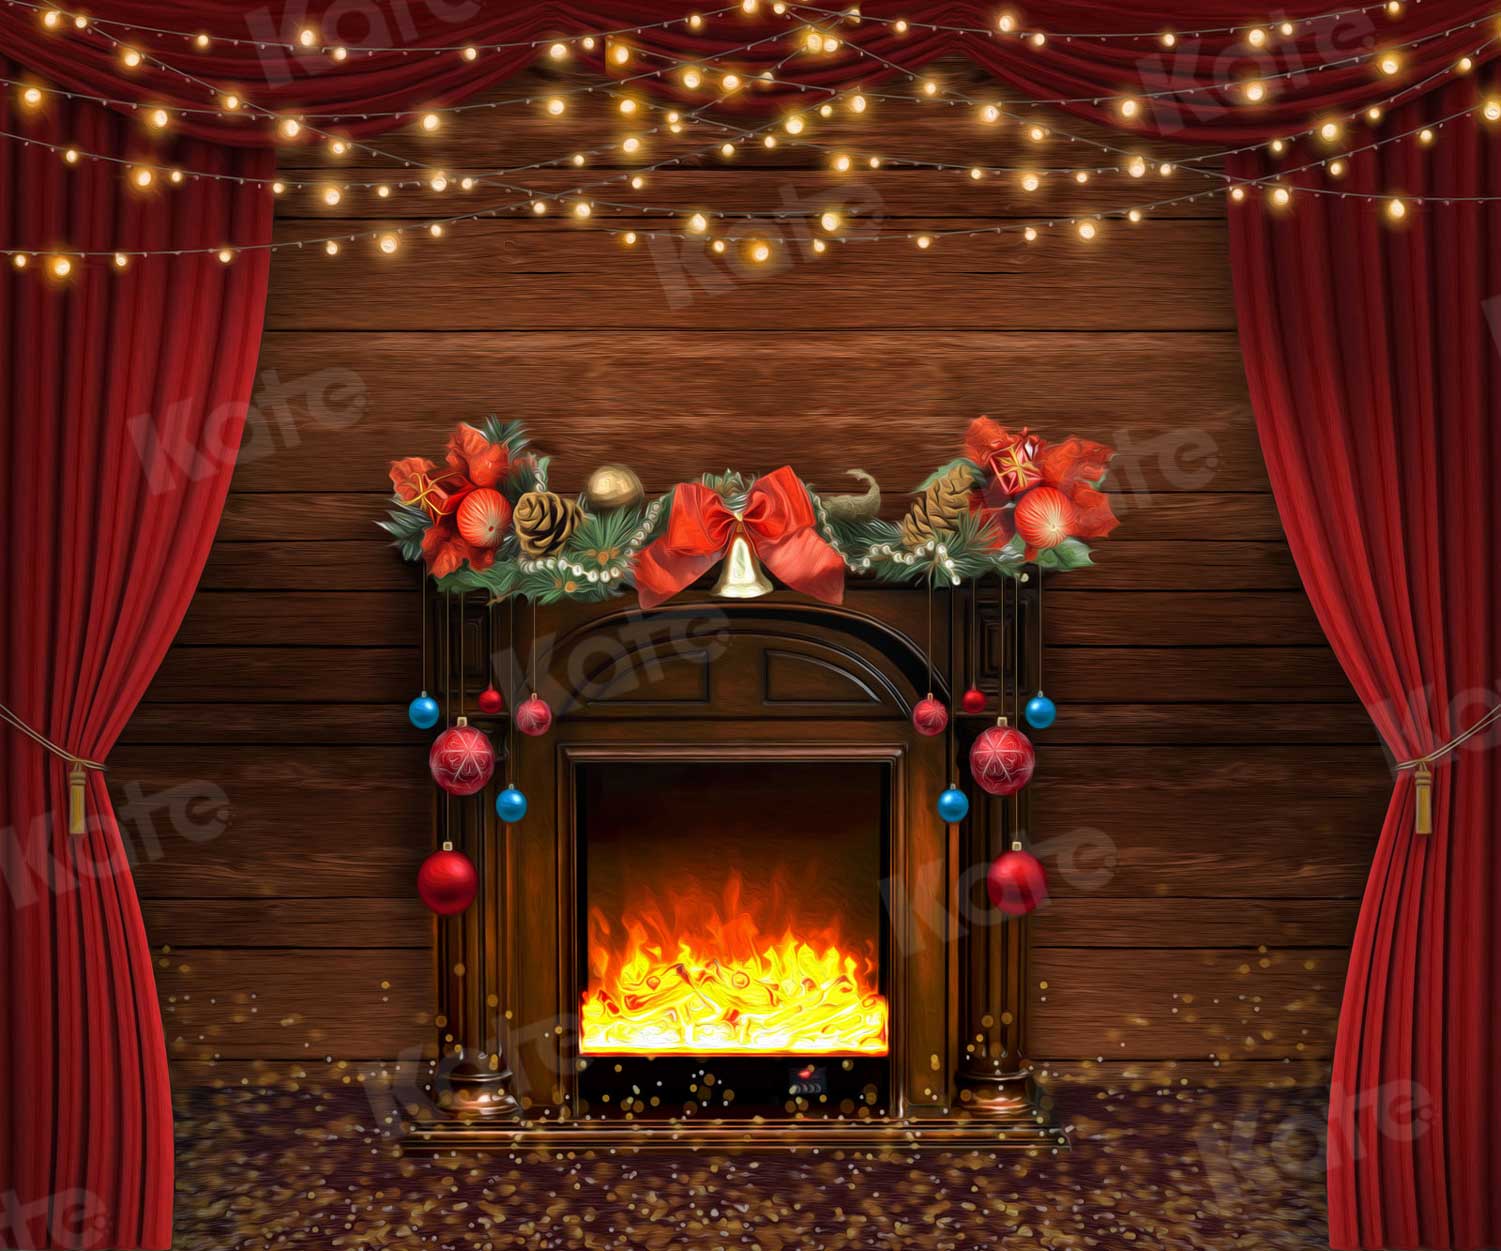 Kate Christmas Fireplace Wooden Backdrop for Photography